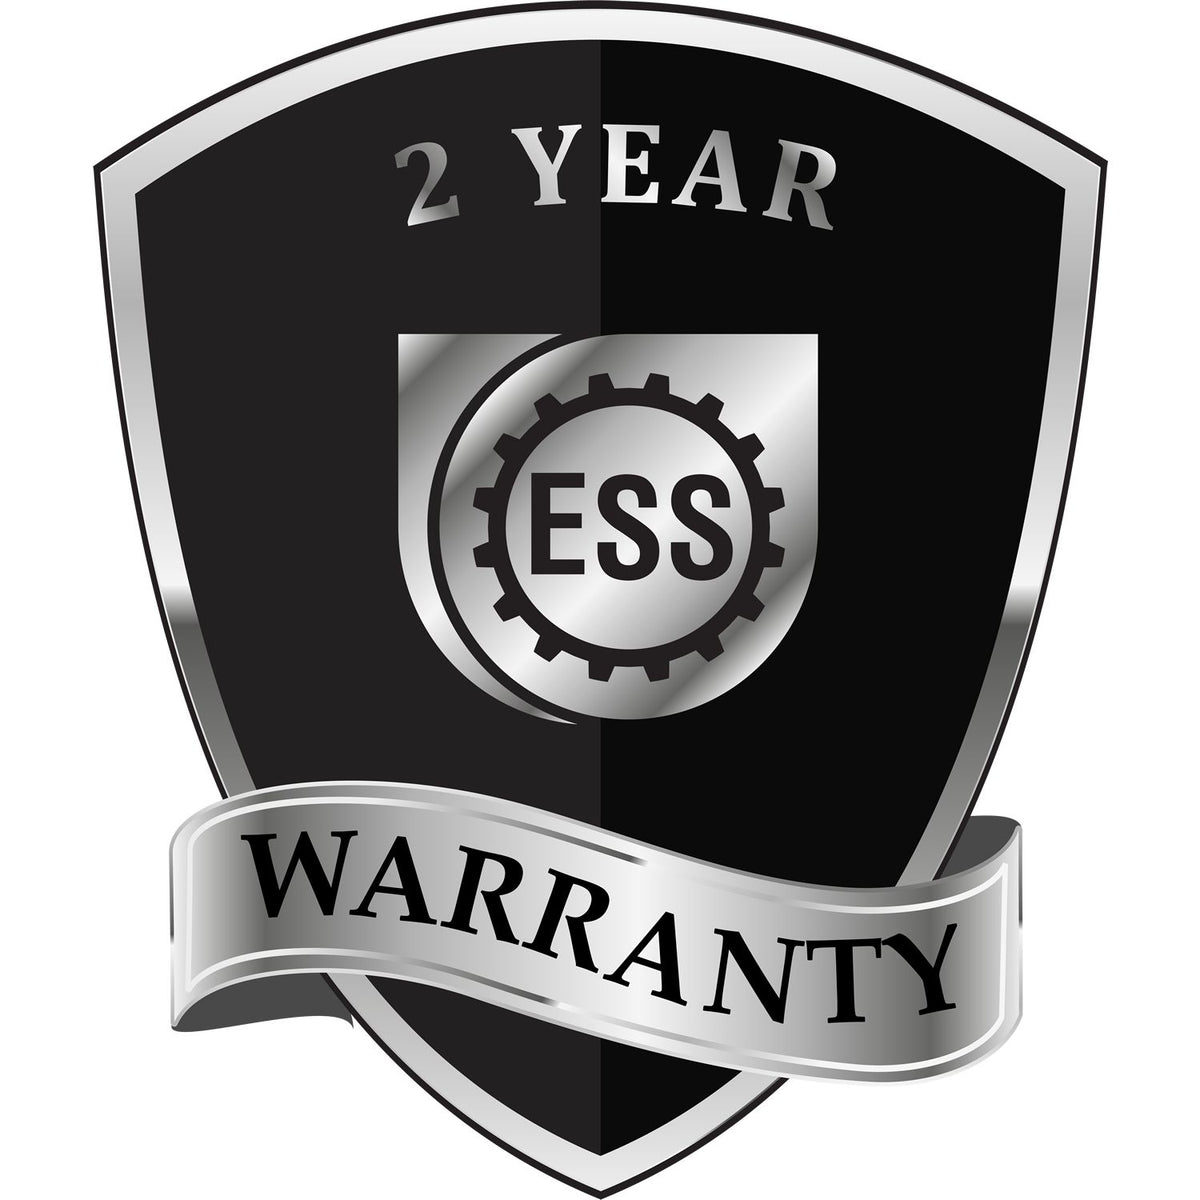 A black and silver badge or emblem showing warranty information for the Gift District of Columbia Architect Seal